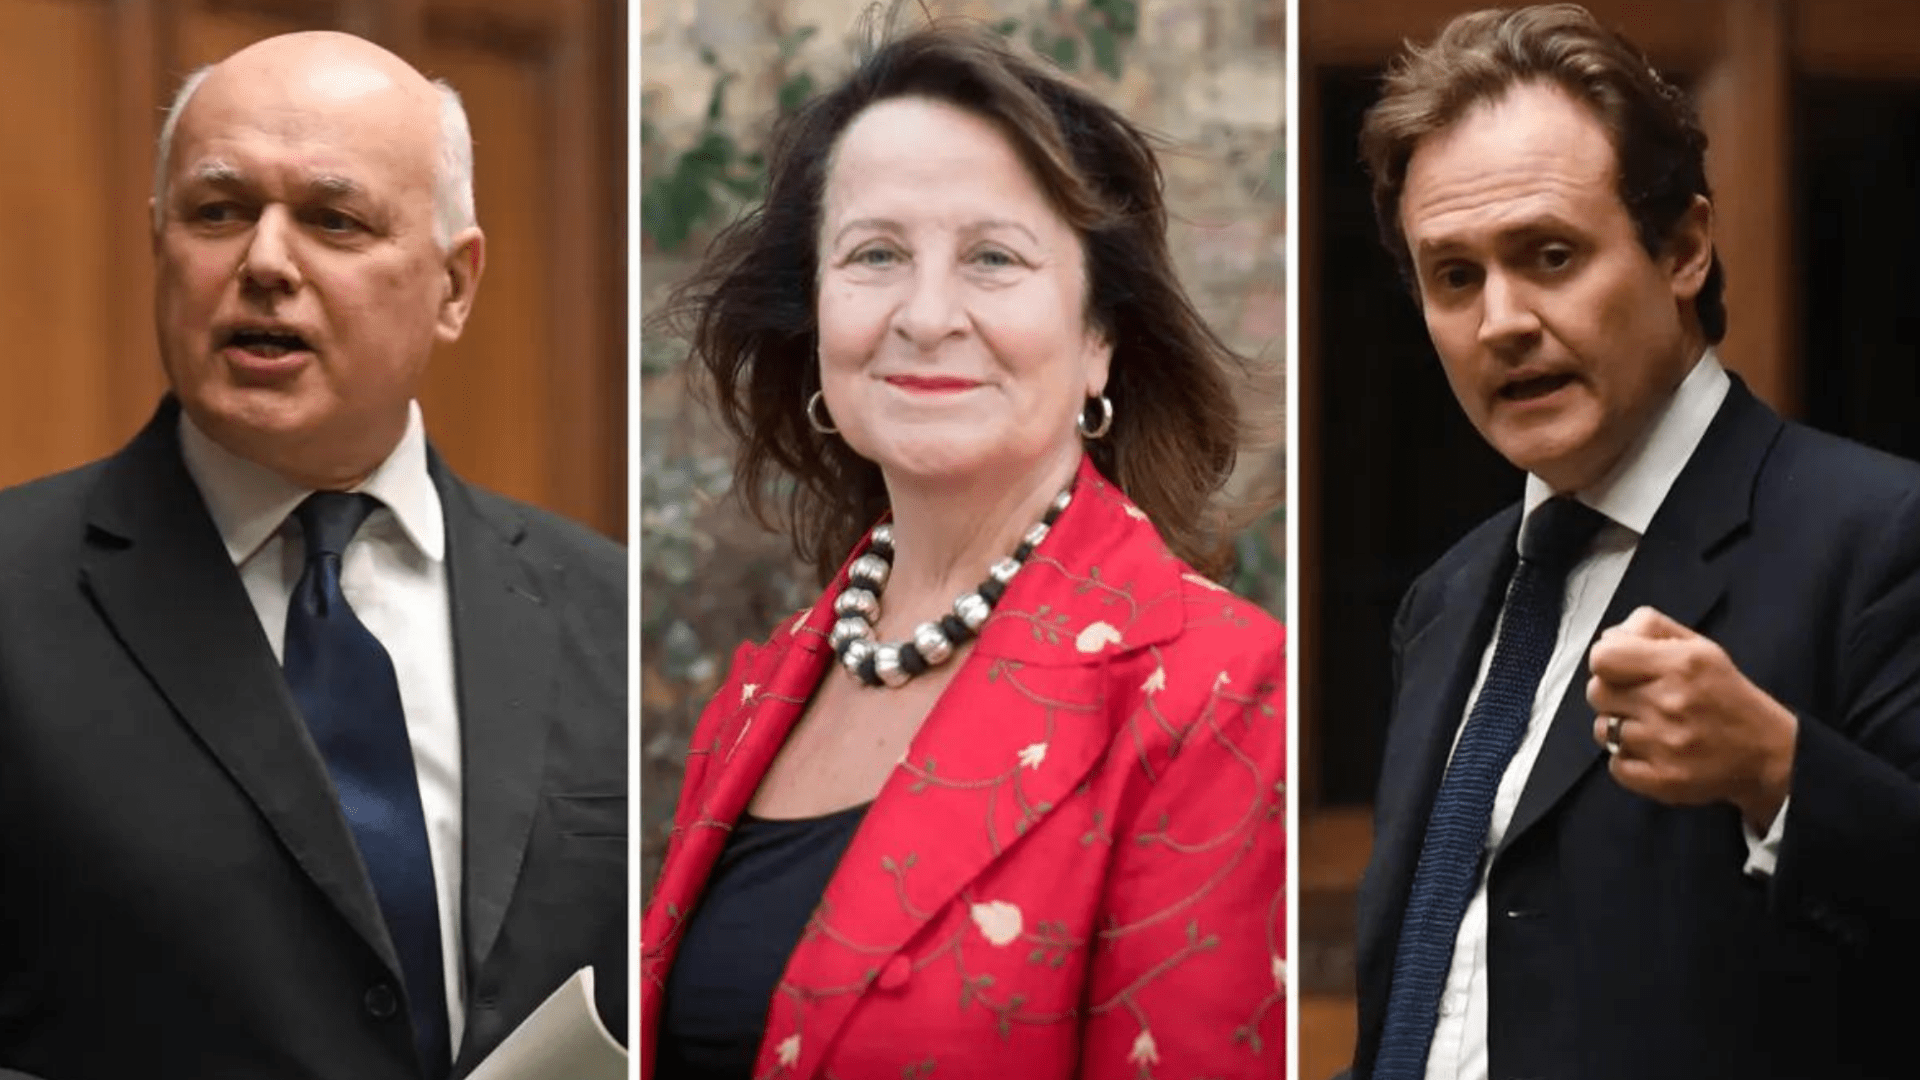 Iain Duncan Smith, Helena Kennedy QC and Tom Tugendhat are among those targeted by the sanctions